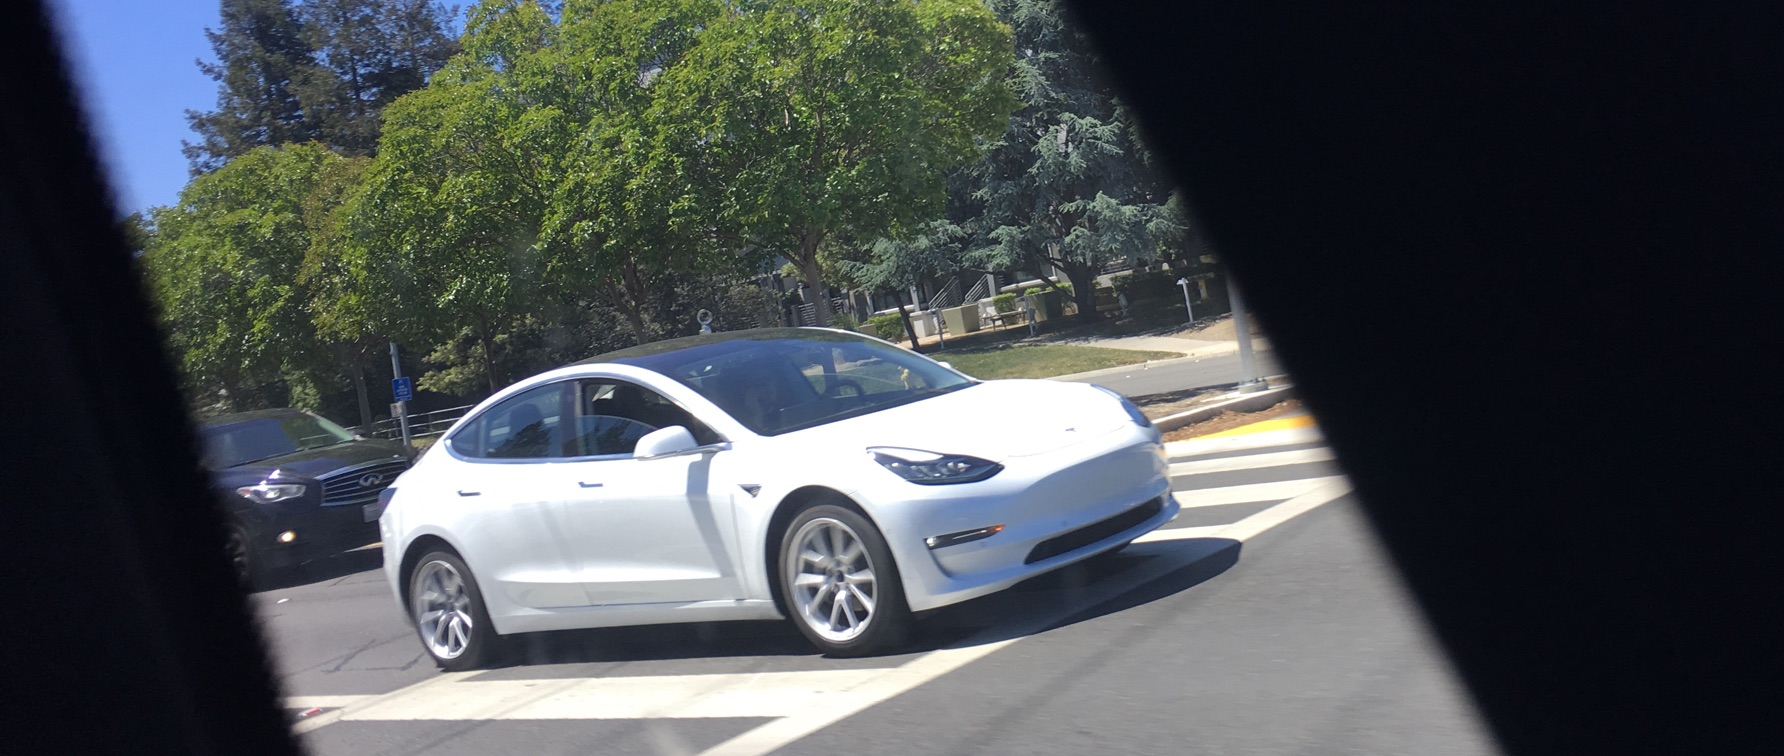 tesla-model-3-can-now-officially-cost-only-25-000-in-california-after